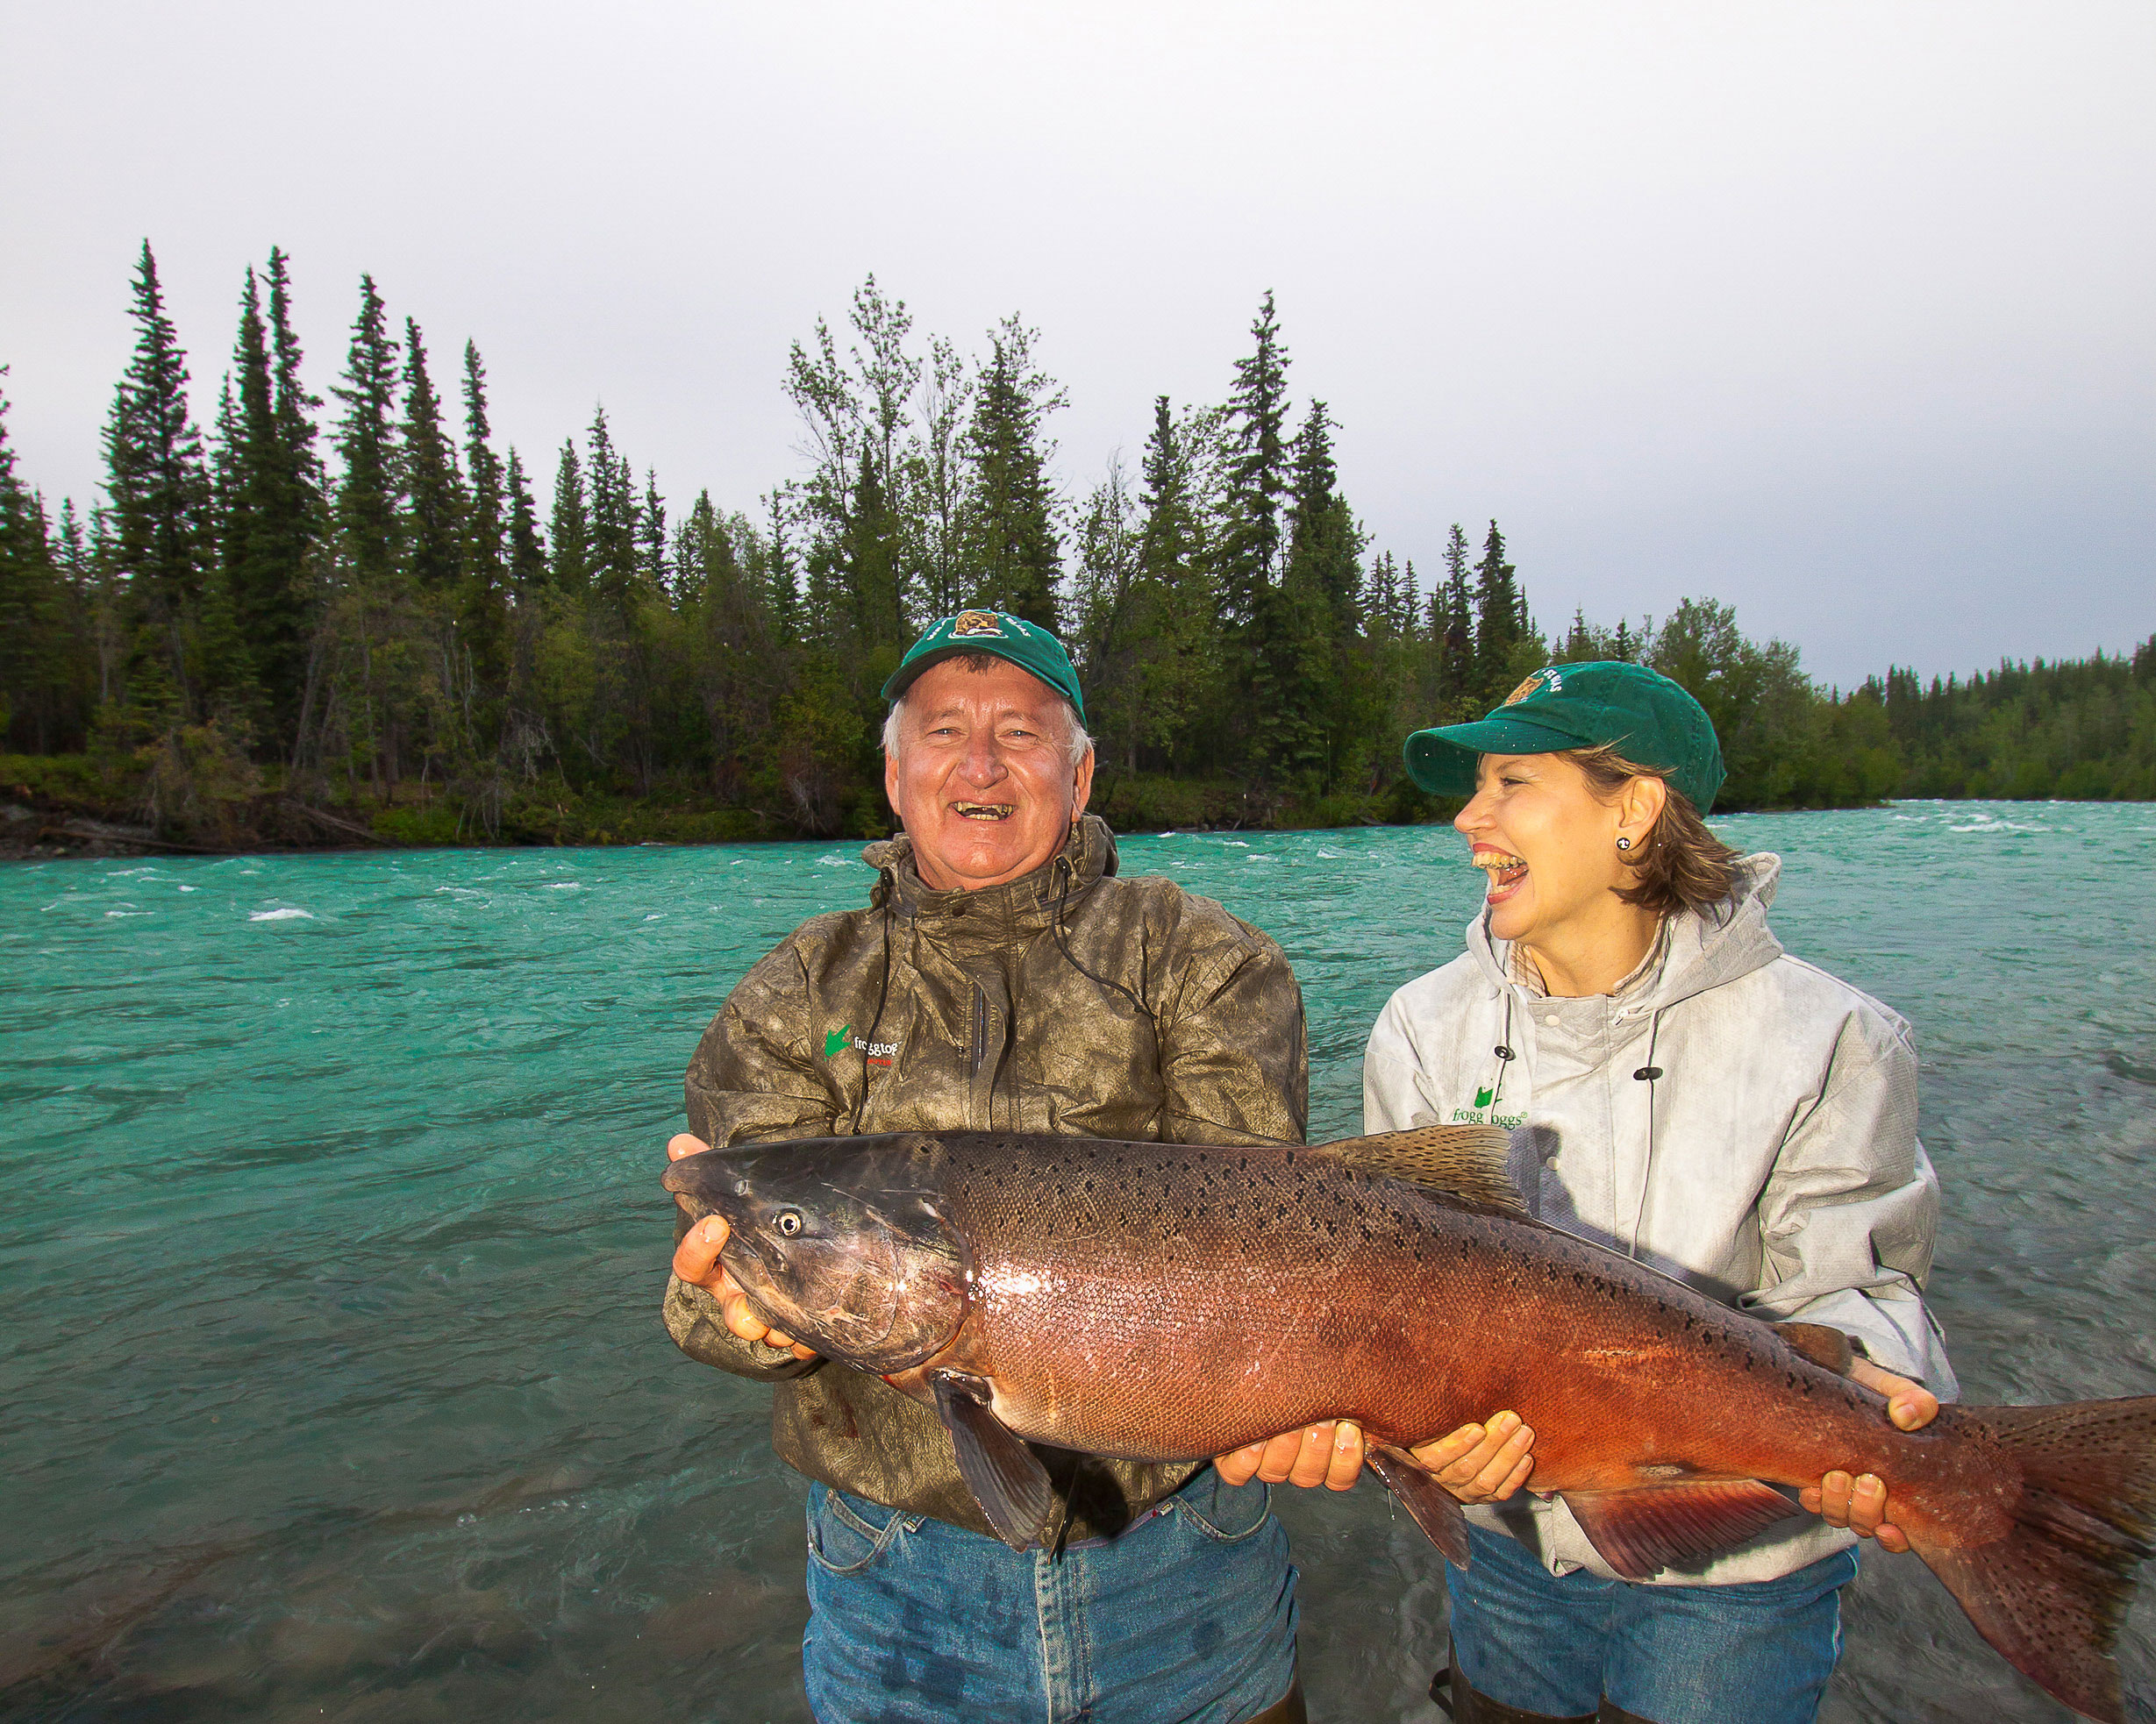 Alaska Wilderness Lodge Experience - Alaska has some of the best fishing in the world! Credit: Michael-DeYoung.